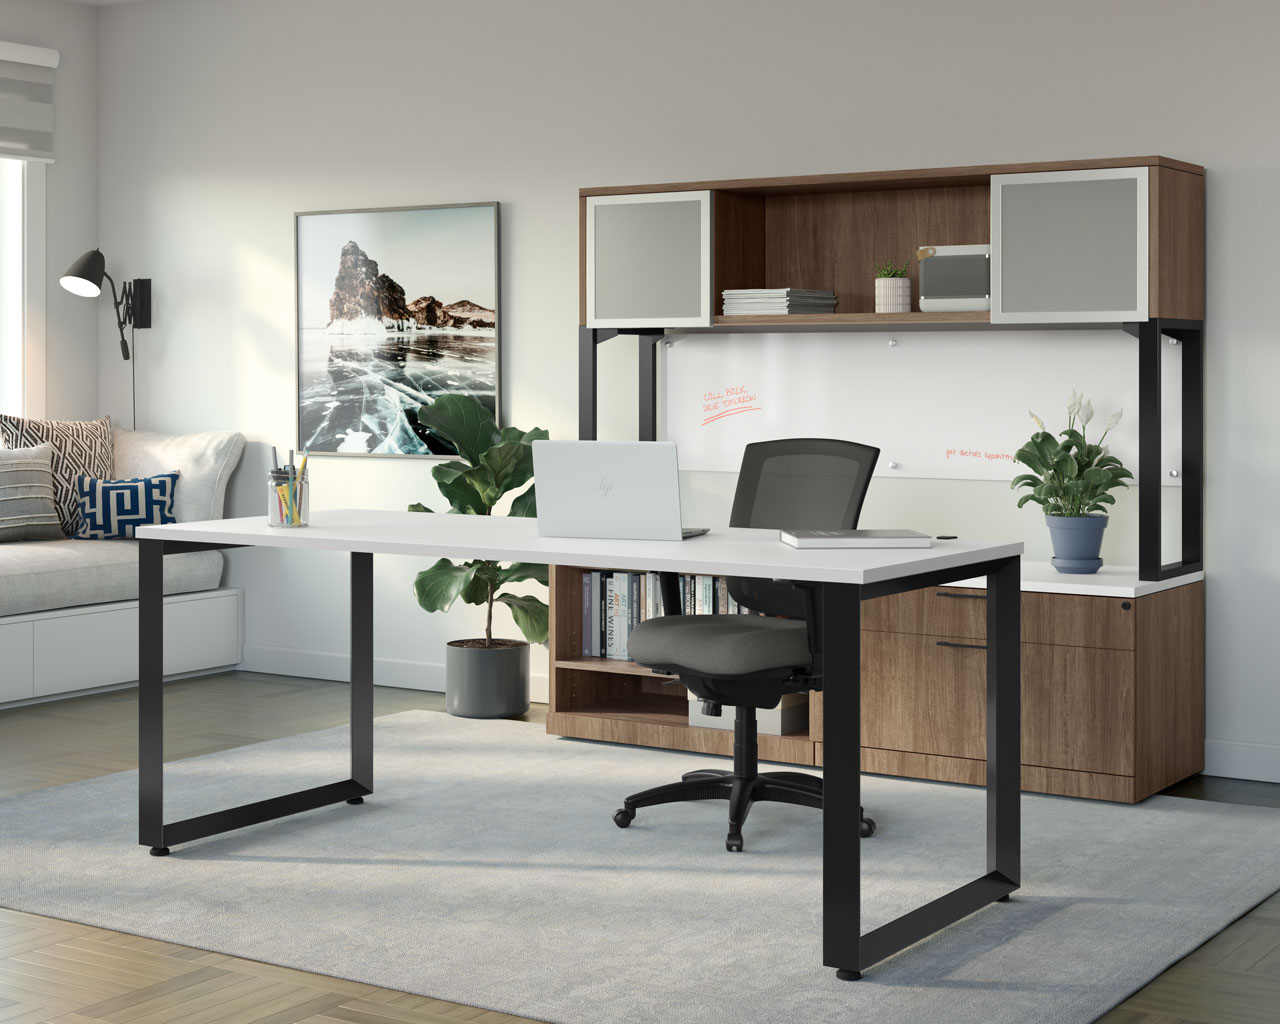 A Productive Workspace with Trendy Office Furniture in Dubai